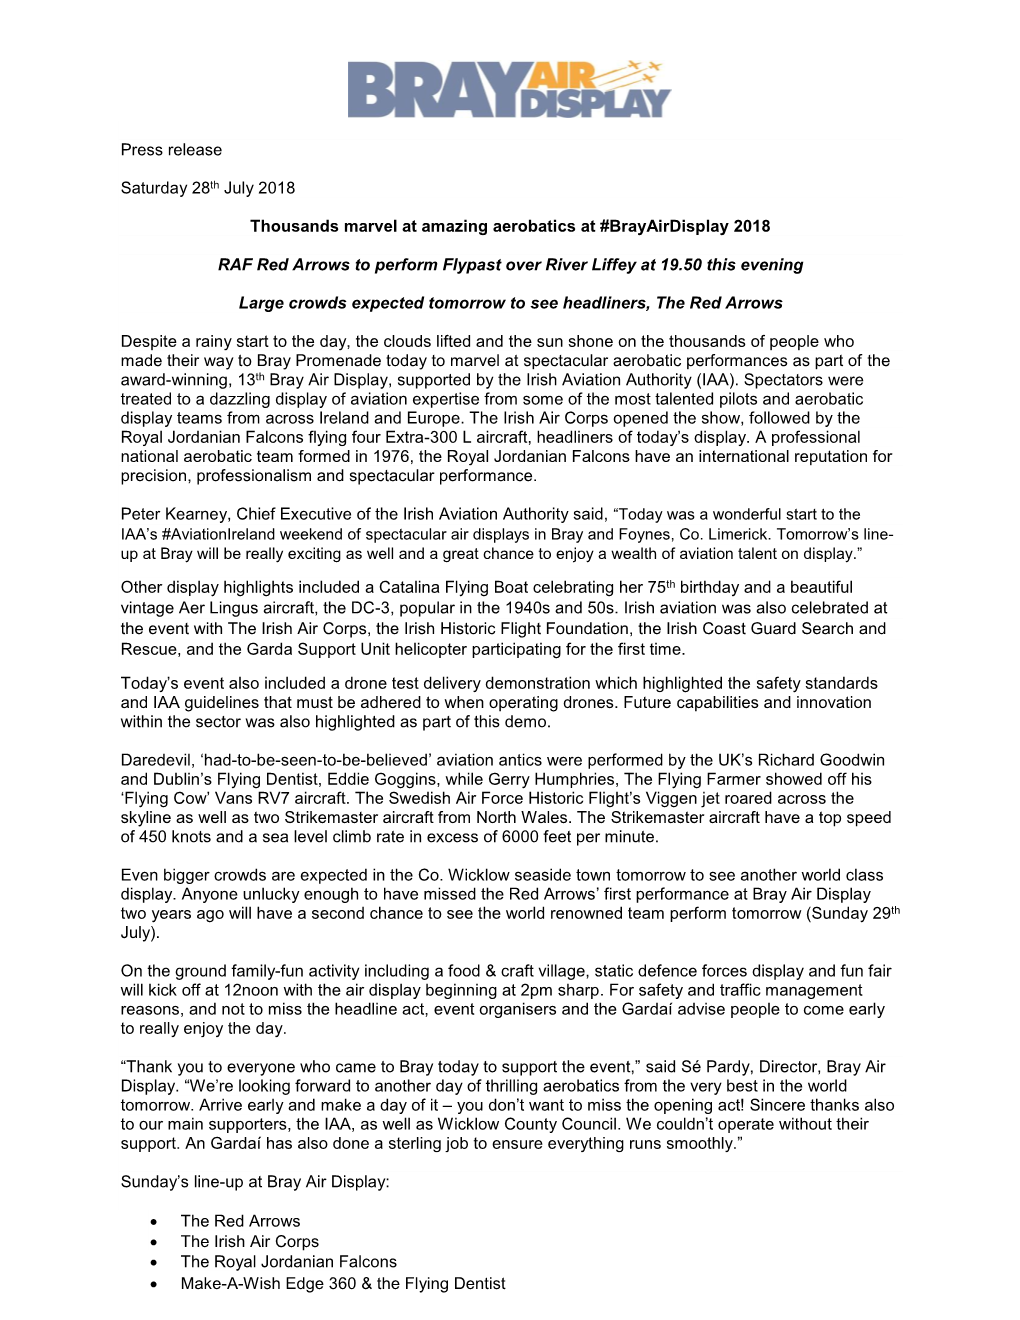 Press Release Saturday 28Th July 2018 Thousands